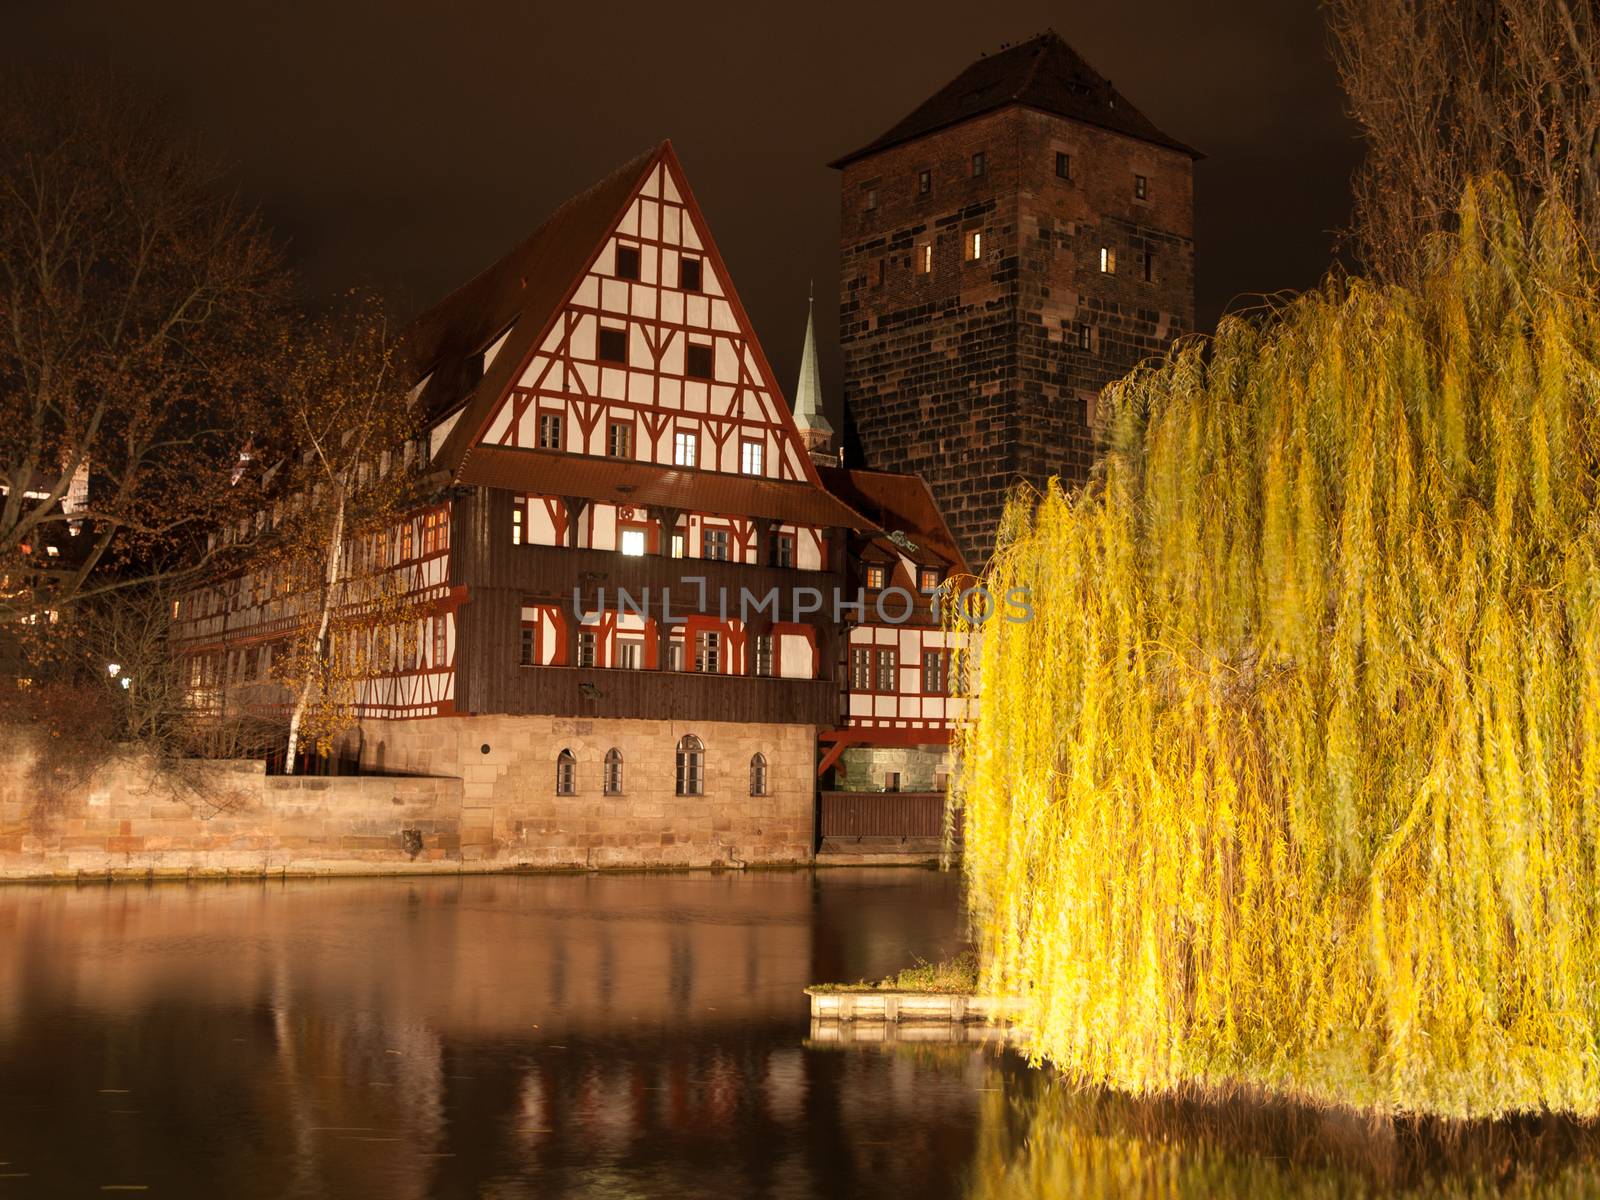 Nuremberg night scene at the river by pyty